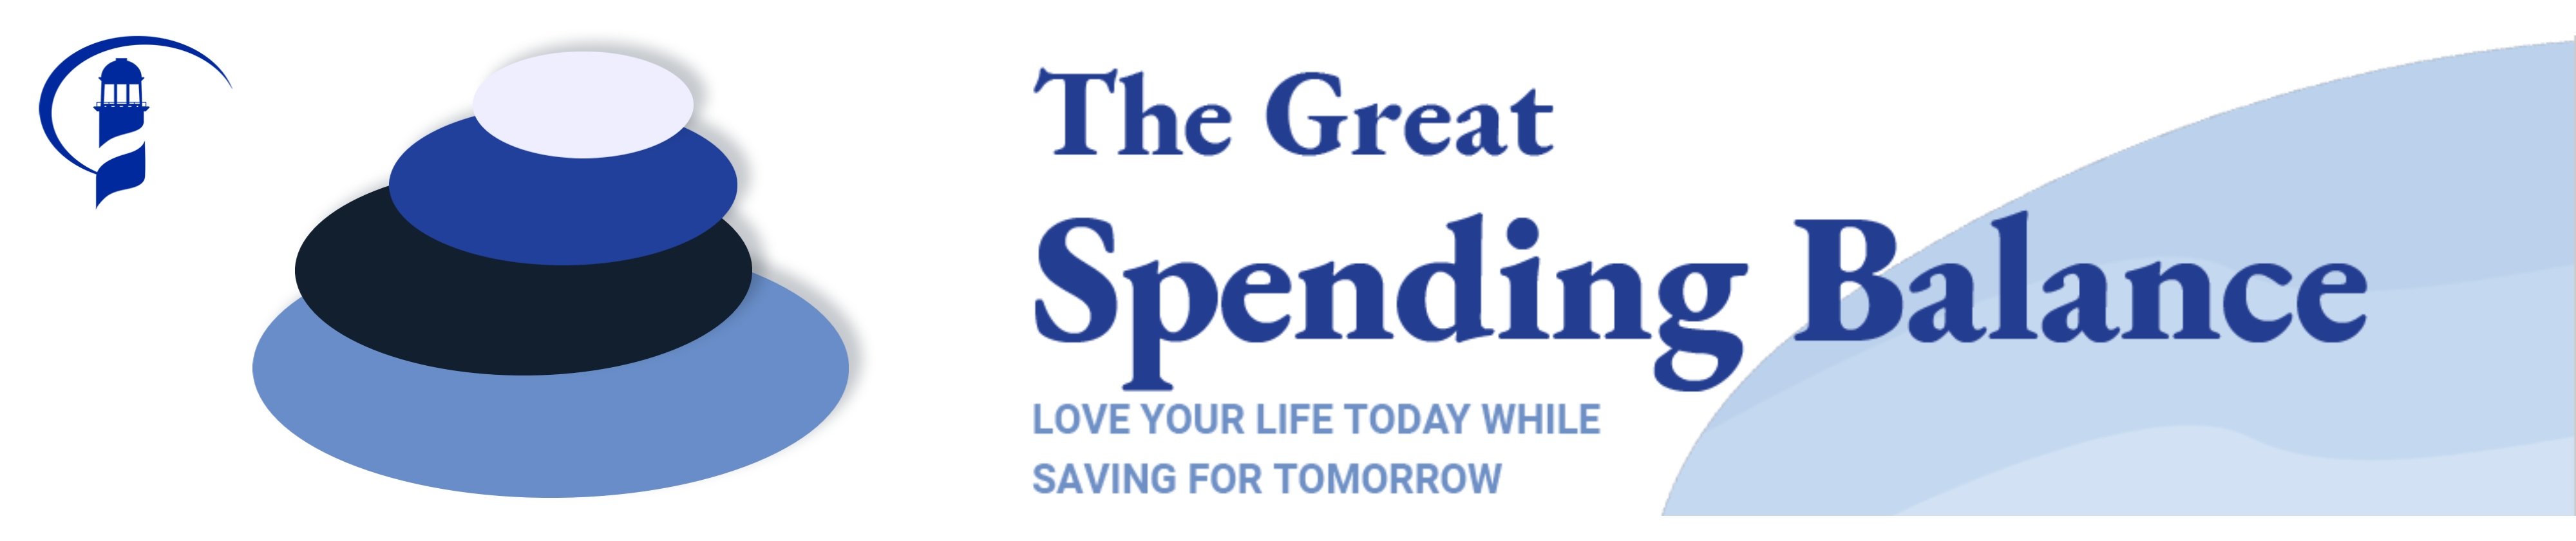 The Great Spending Balance: Love Your Life Today While Saving For Tomorrow 